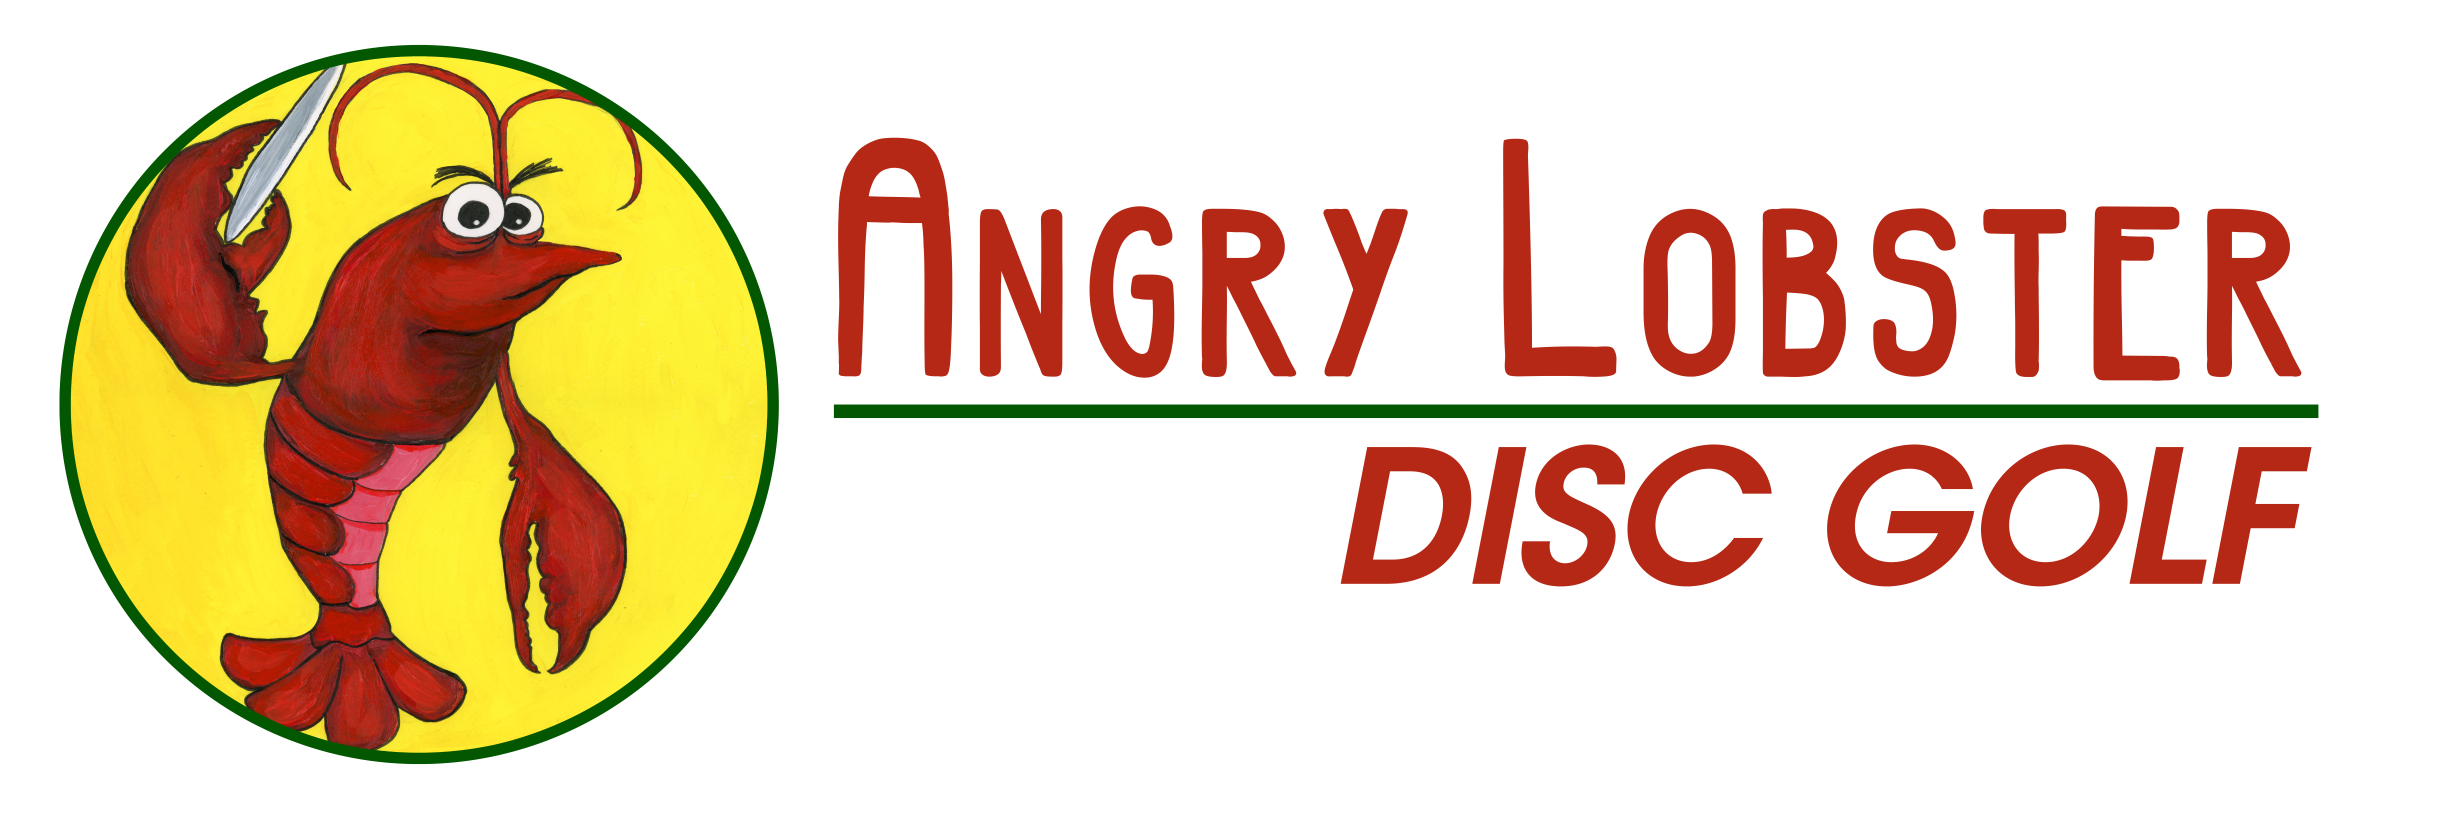 Angry Lobster Disc Golf